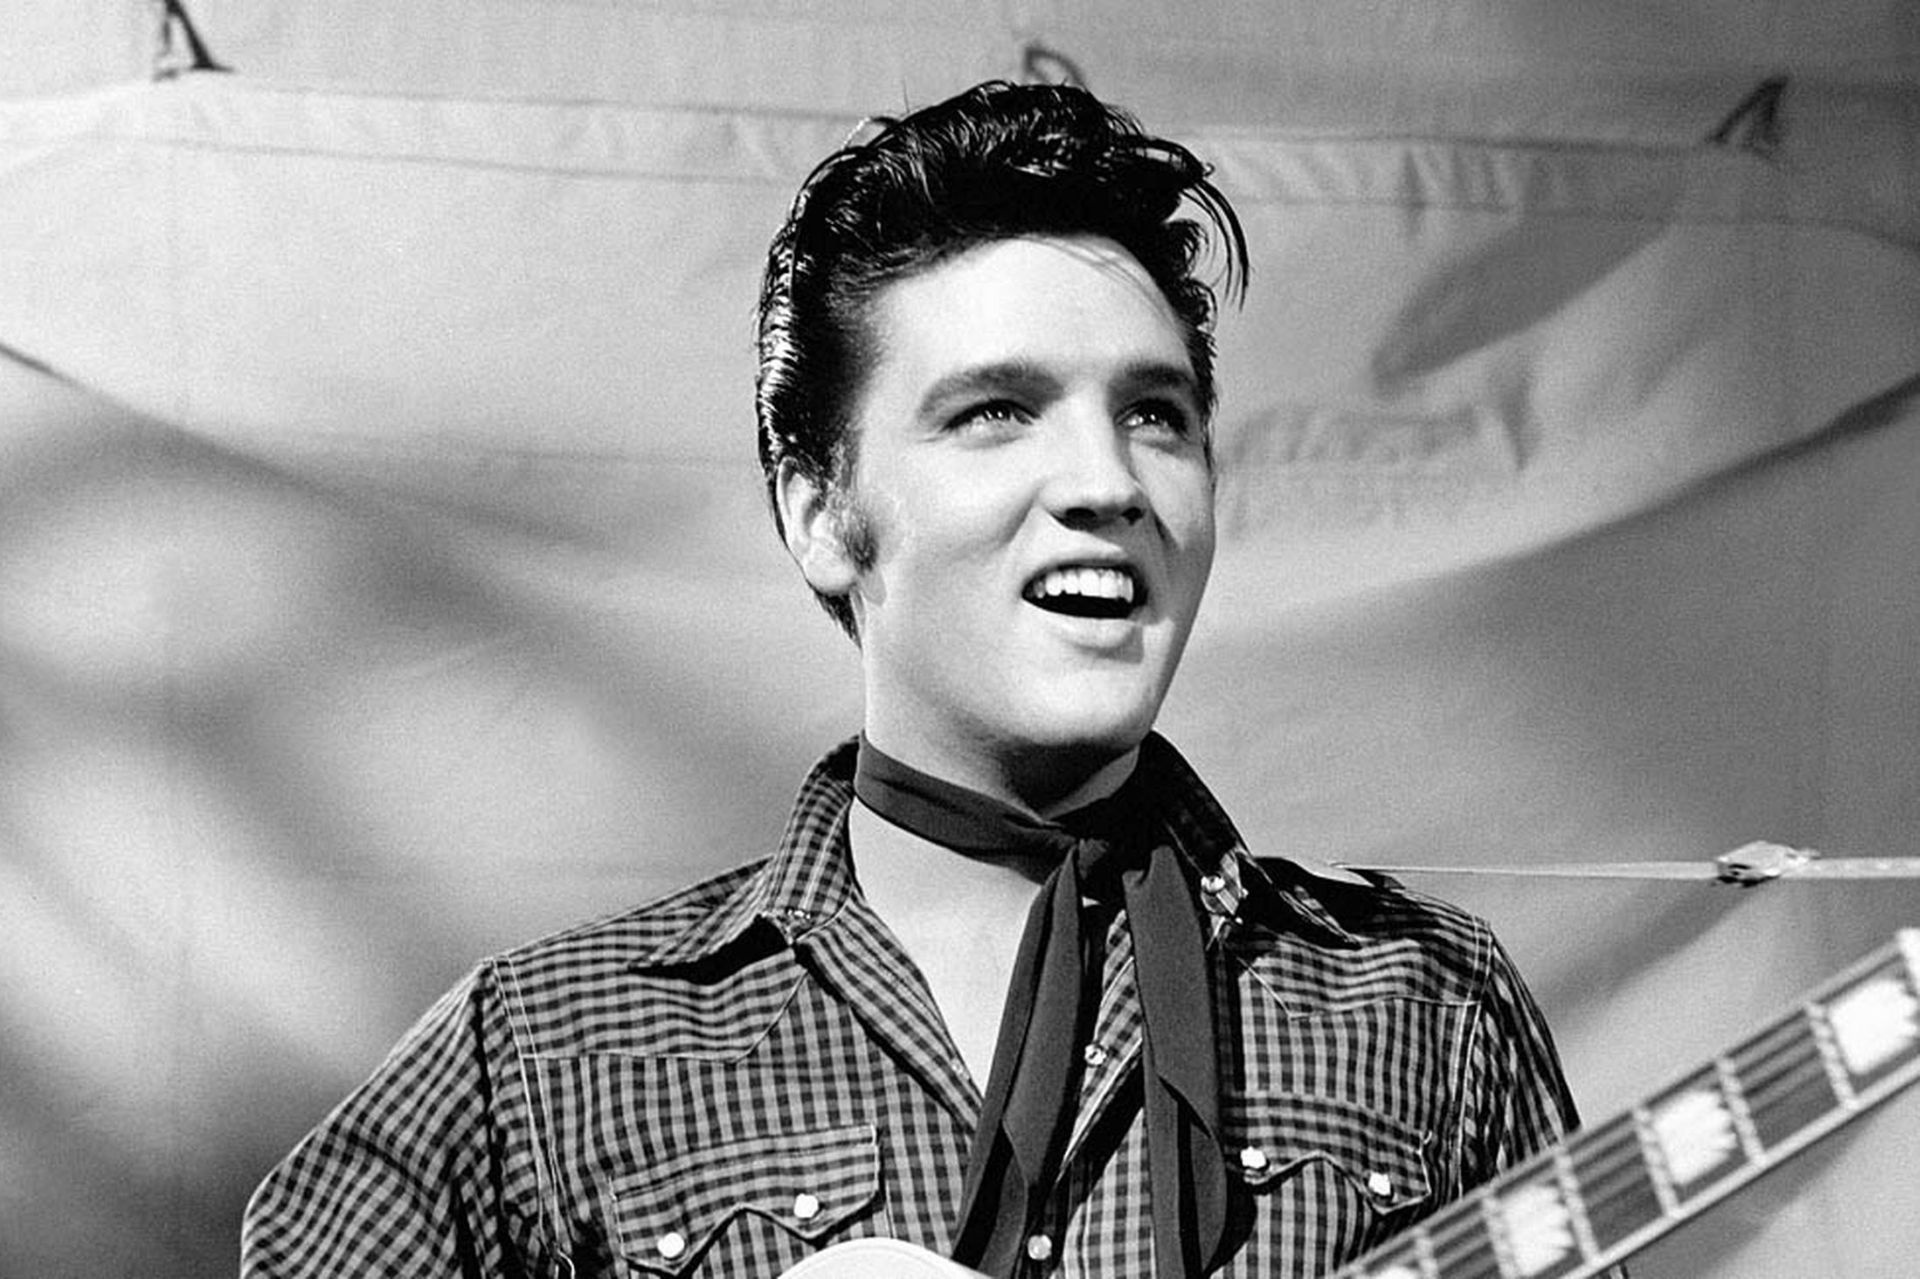 Elvis Presley: The King, Famous American singer and performer, “If I Can Dream”. 1920x1280 HD Wallpaper.